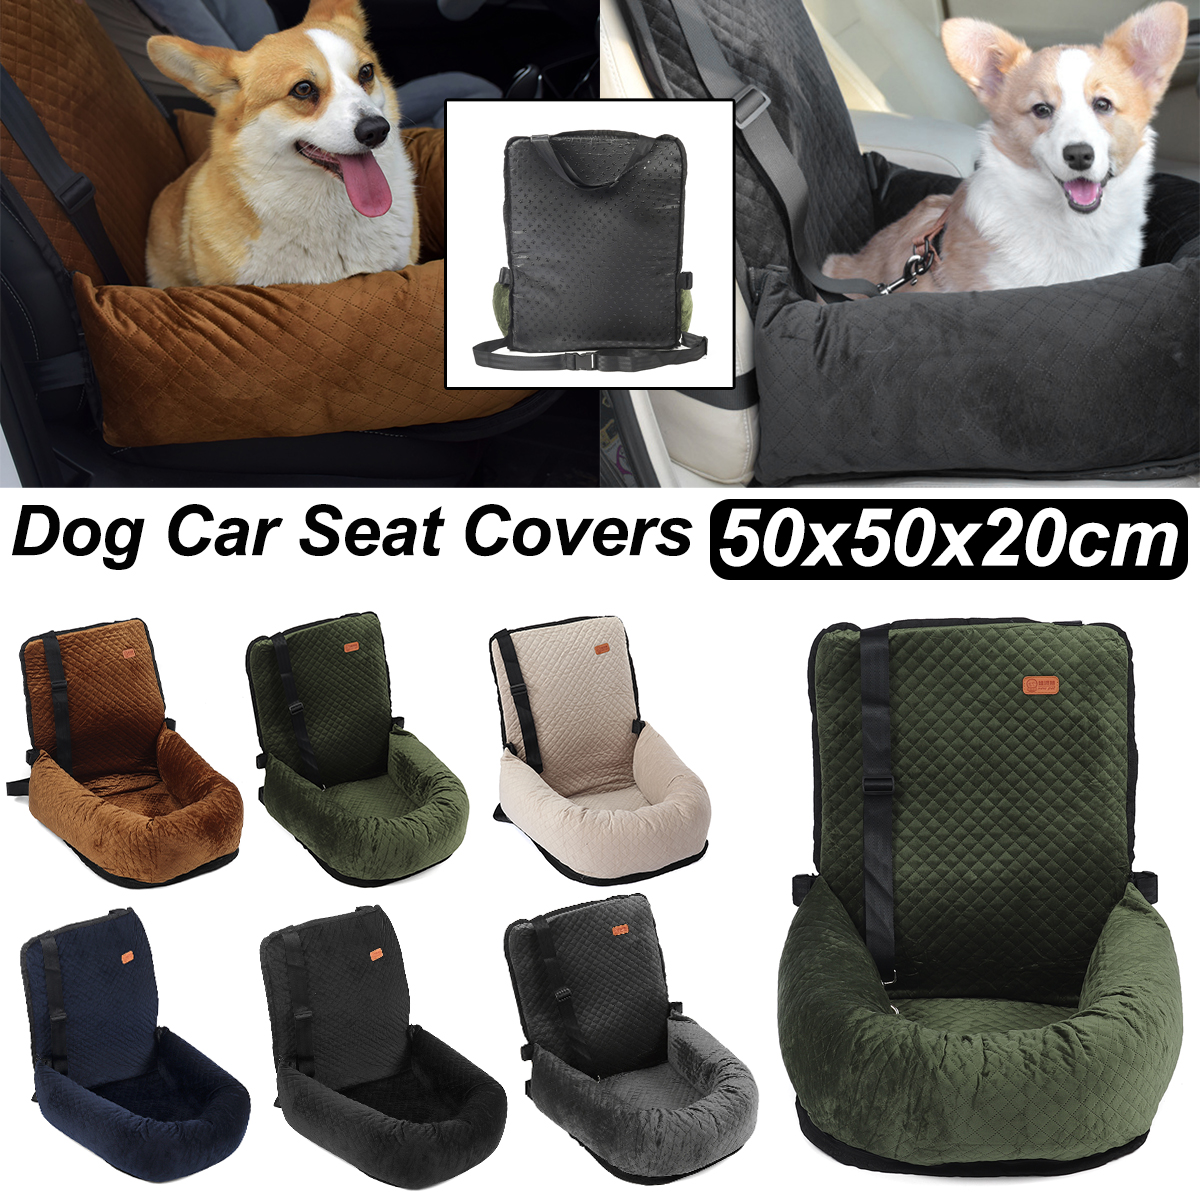 2-in-1-Dog-Car-Seat-Cover-Folding-Dog-Carrier-Removable-Dog-Car-Pads-Waterproof-and-Moisture-proof-D-1908600-1